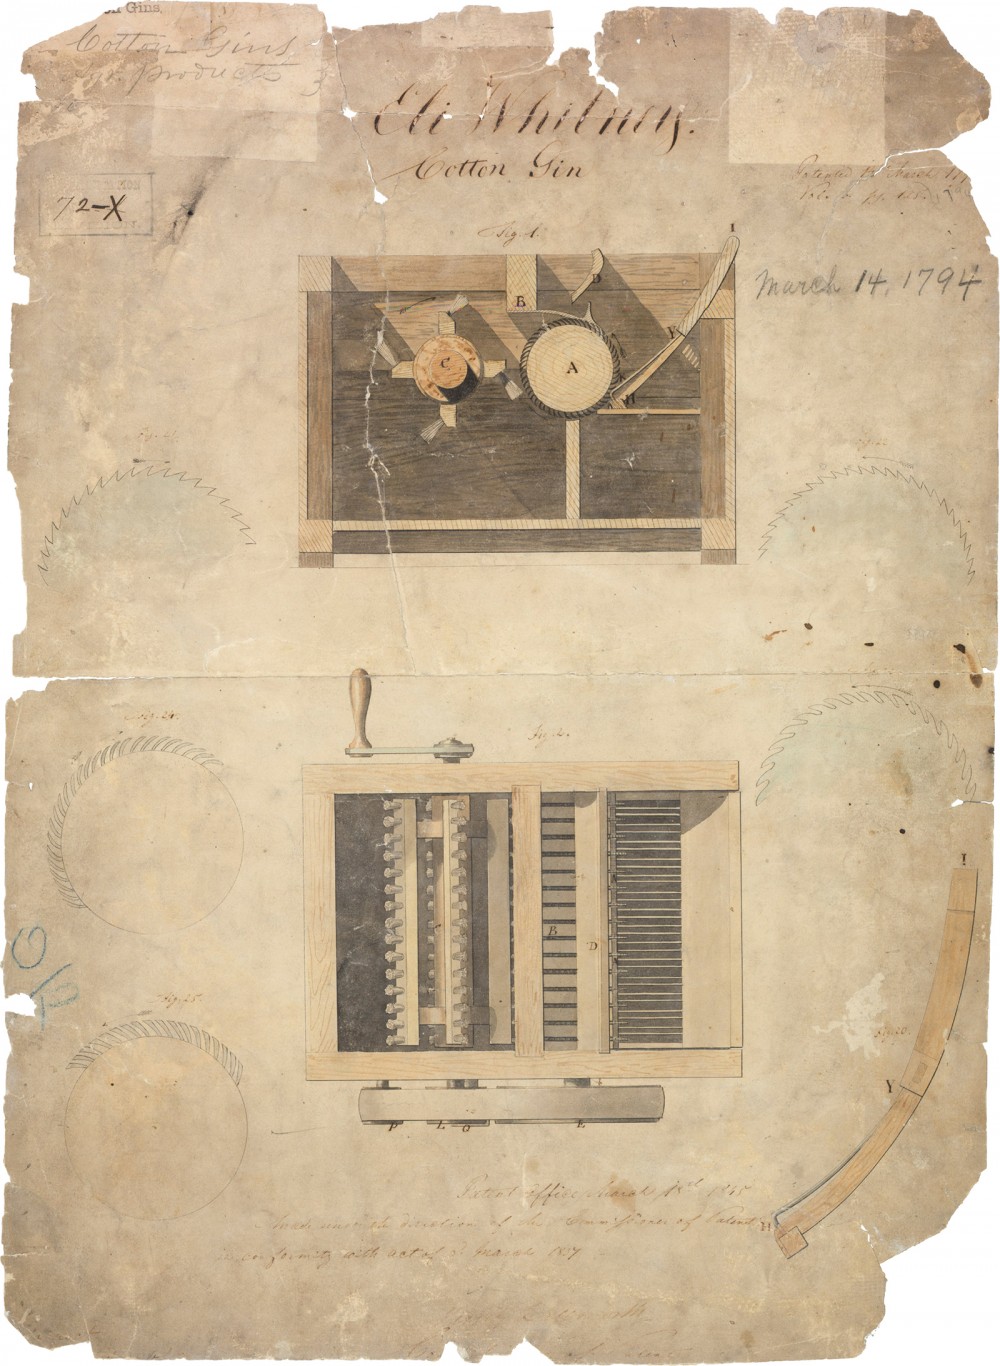 This photograph shows the original diagram used in Eli Whitney's patent application for his cotton gin. 